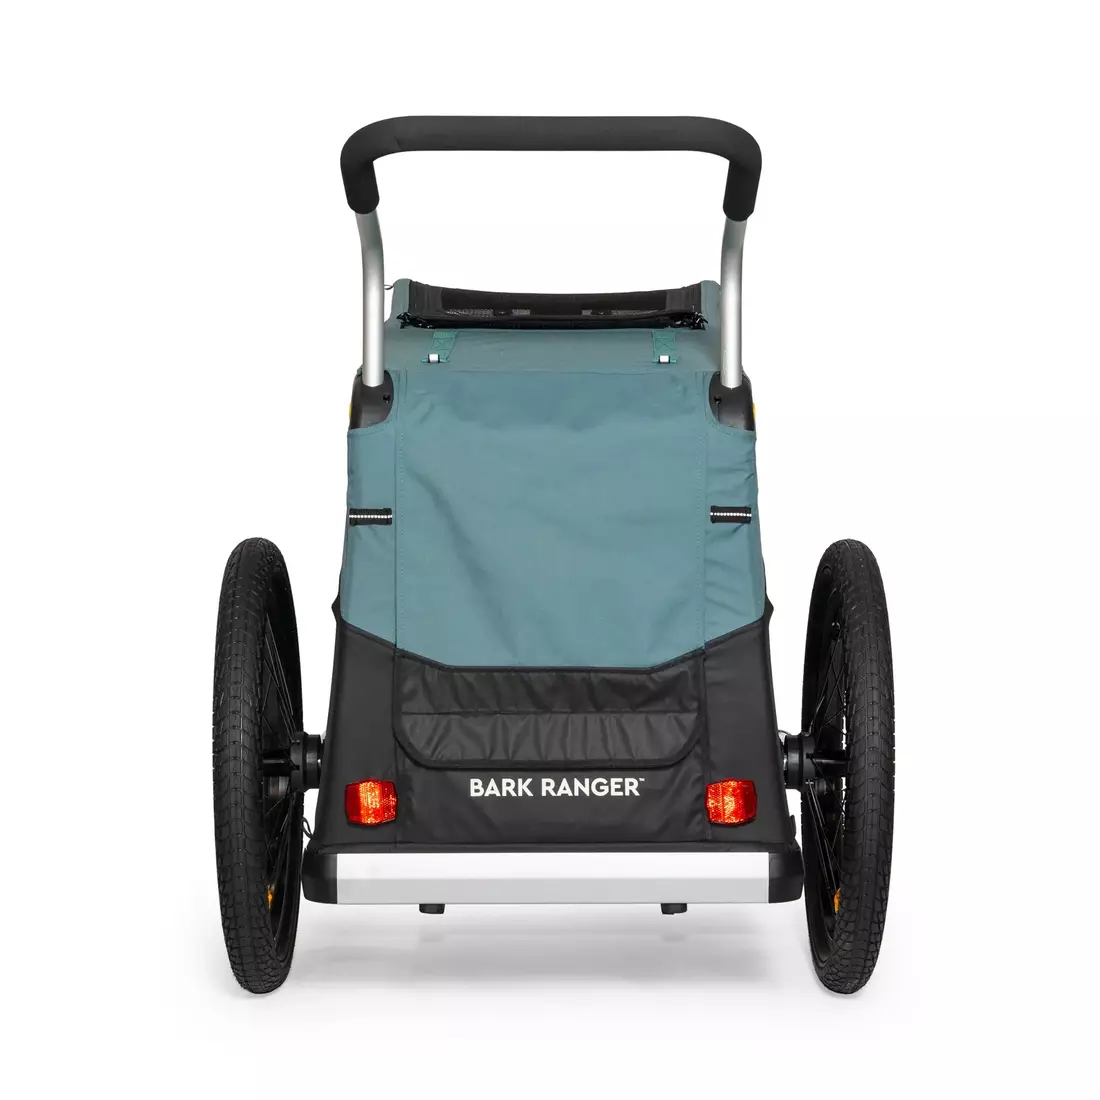 BURLEY TAIL BARK RANGER XL bicycle trailer for belt, blue and black